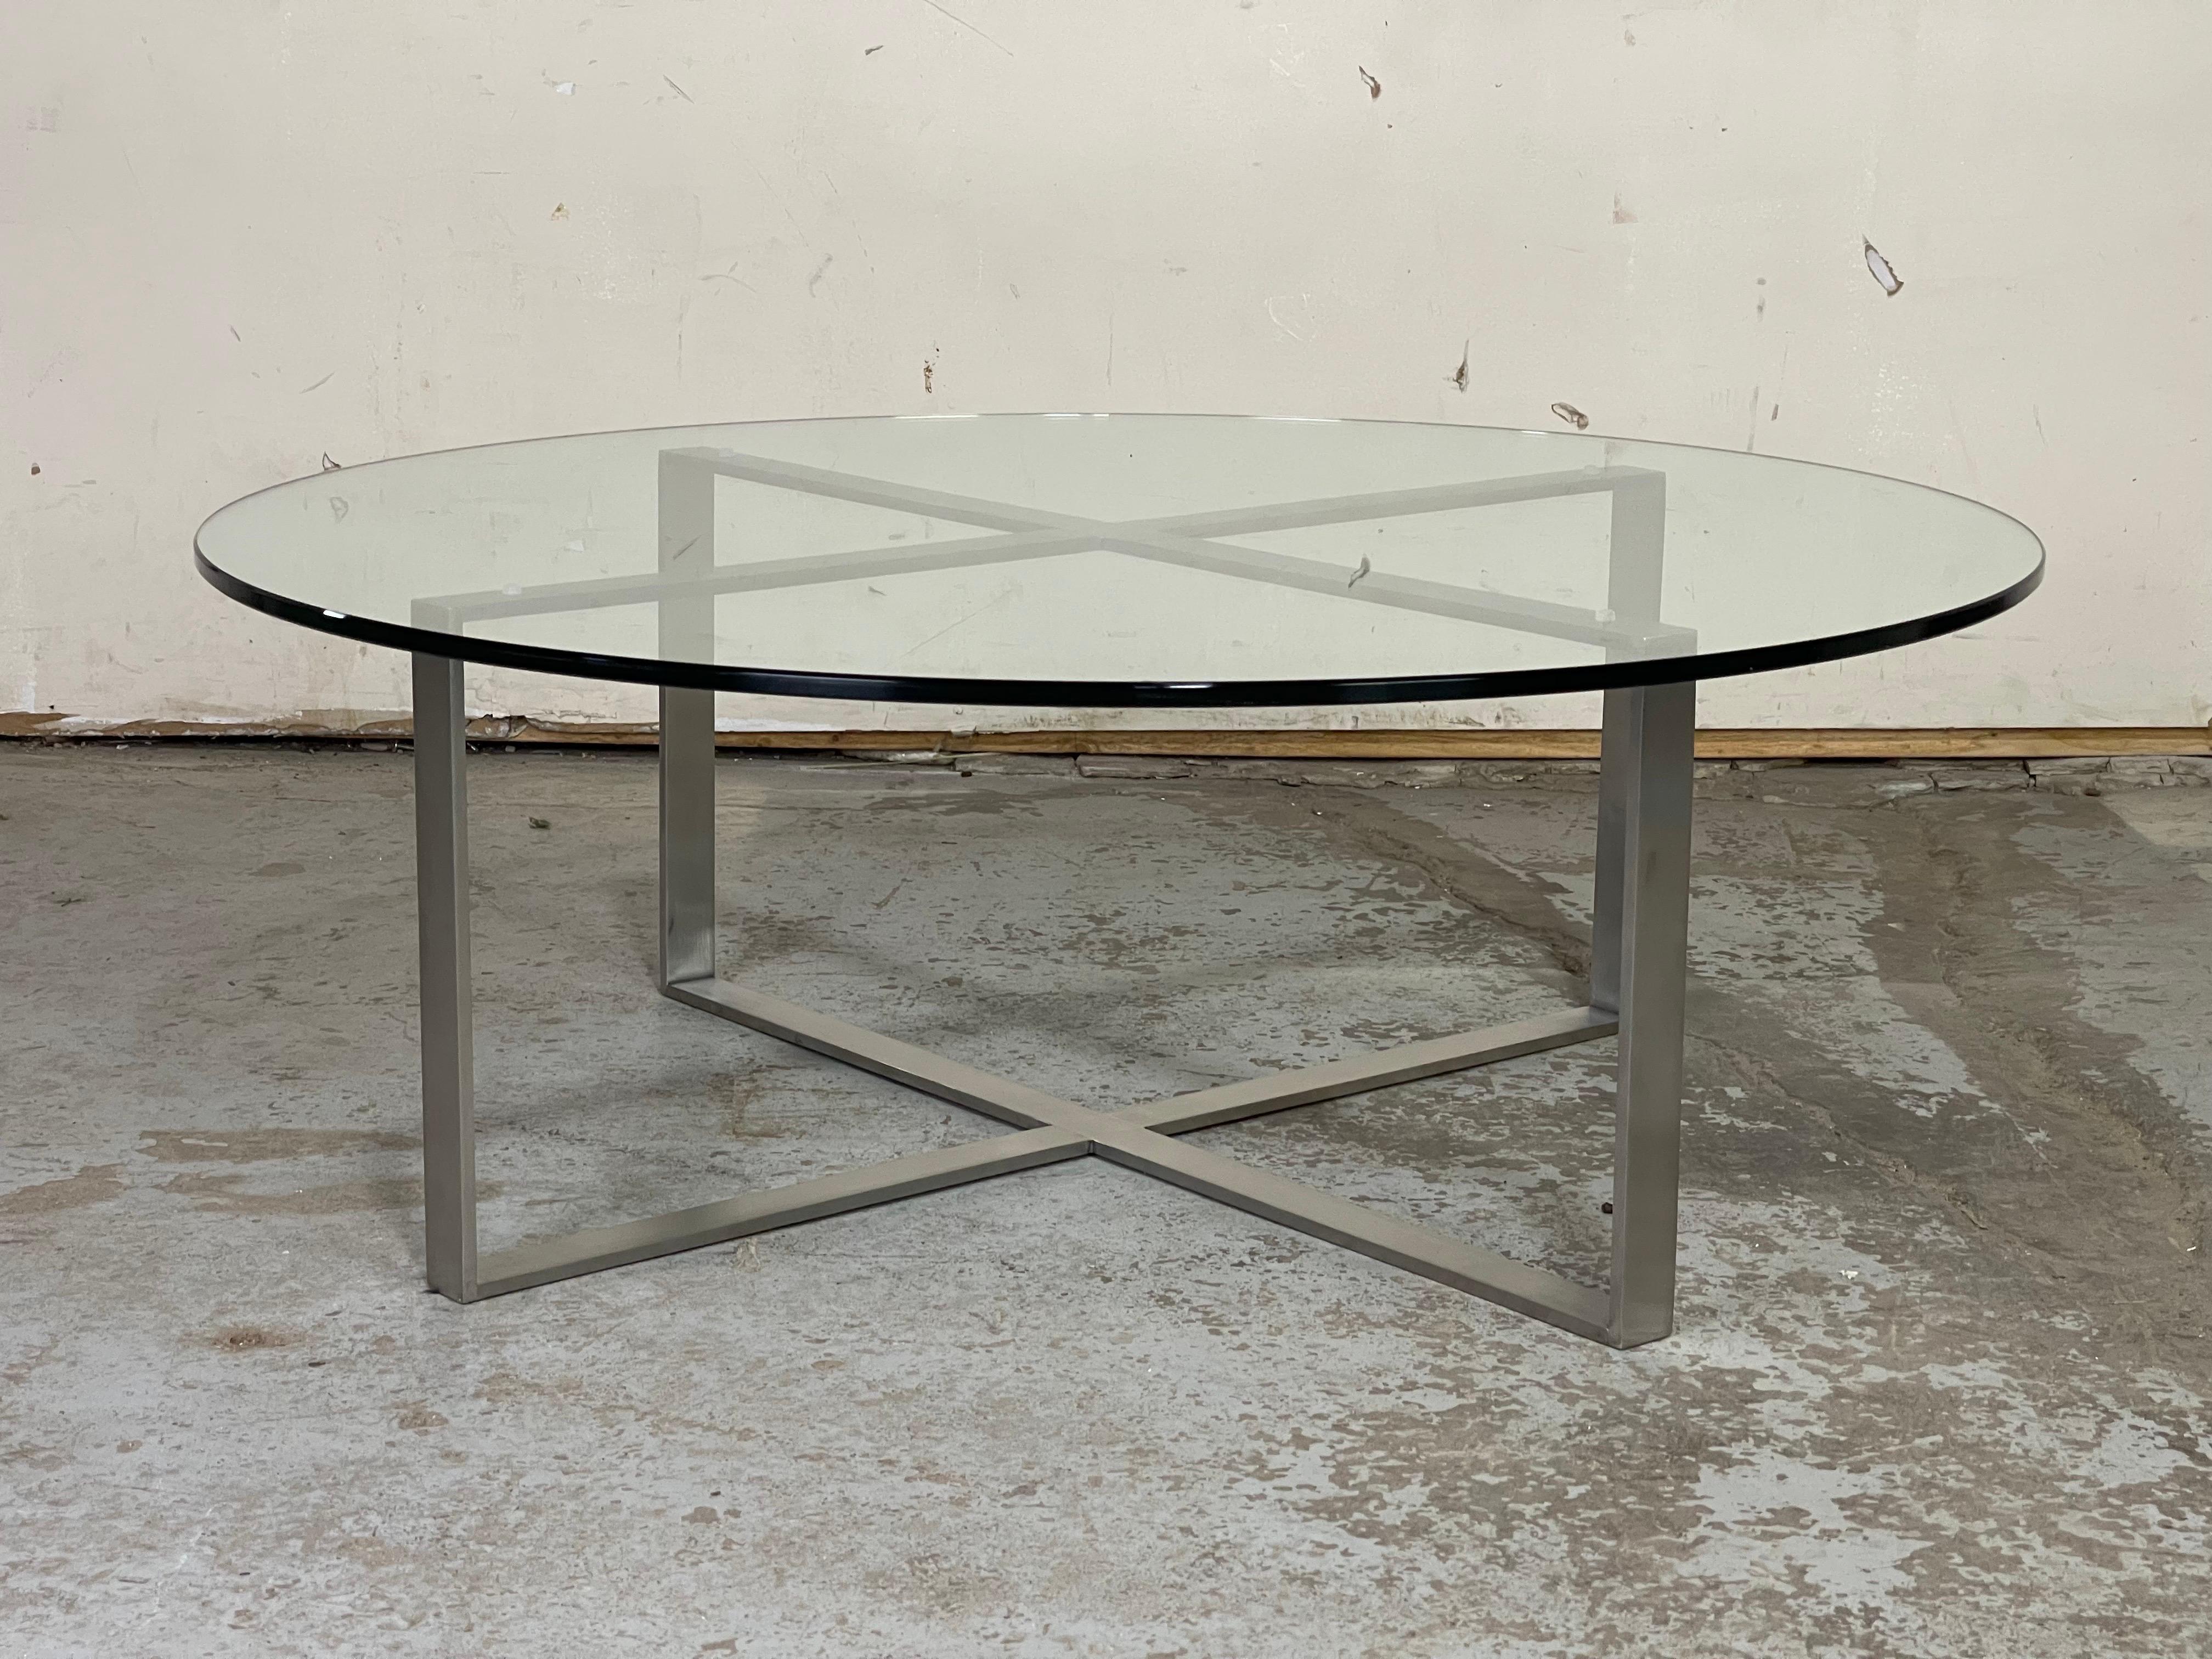 Very well made brushed stainless steel and glass coffee table by Bernhardt. The stainless steel is very heavy and amazingly one solid piece. The glass is in great shape with very minimal wear and thick. Same weight and quality as Knoll. 
41.75